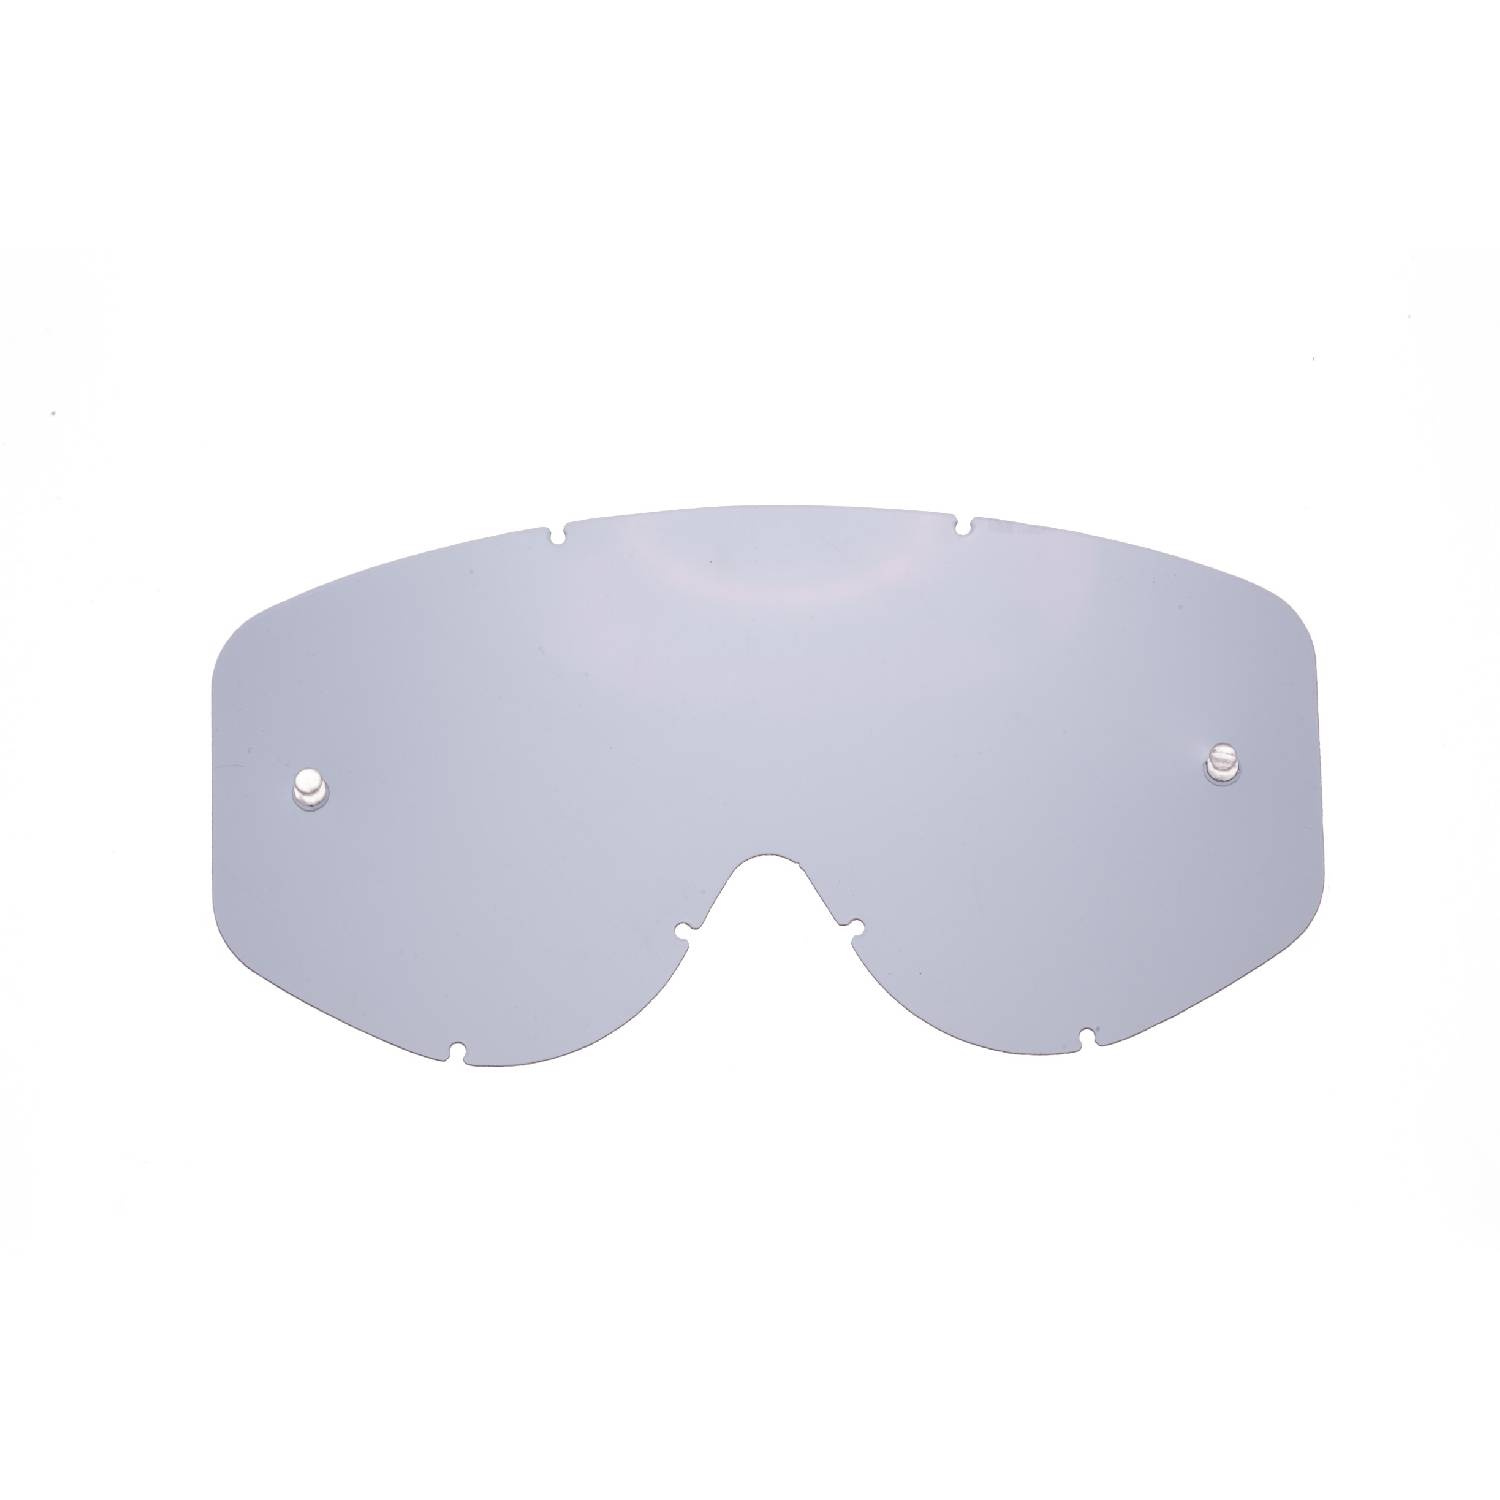 smokey replacement lenses for goggles compatible for Scott 83/89 / Recoil / 89 Xi goggle